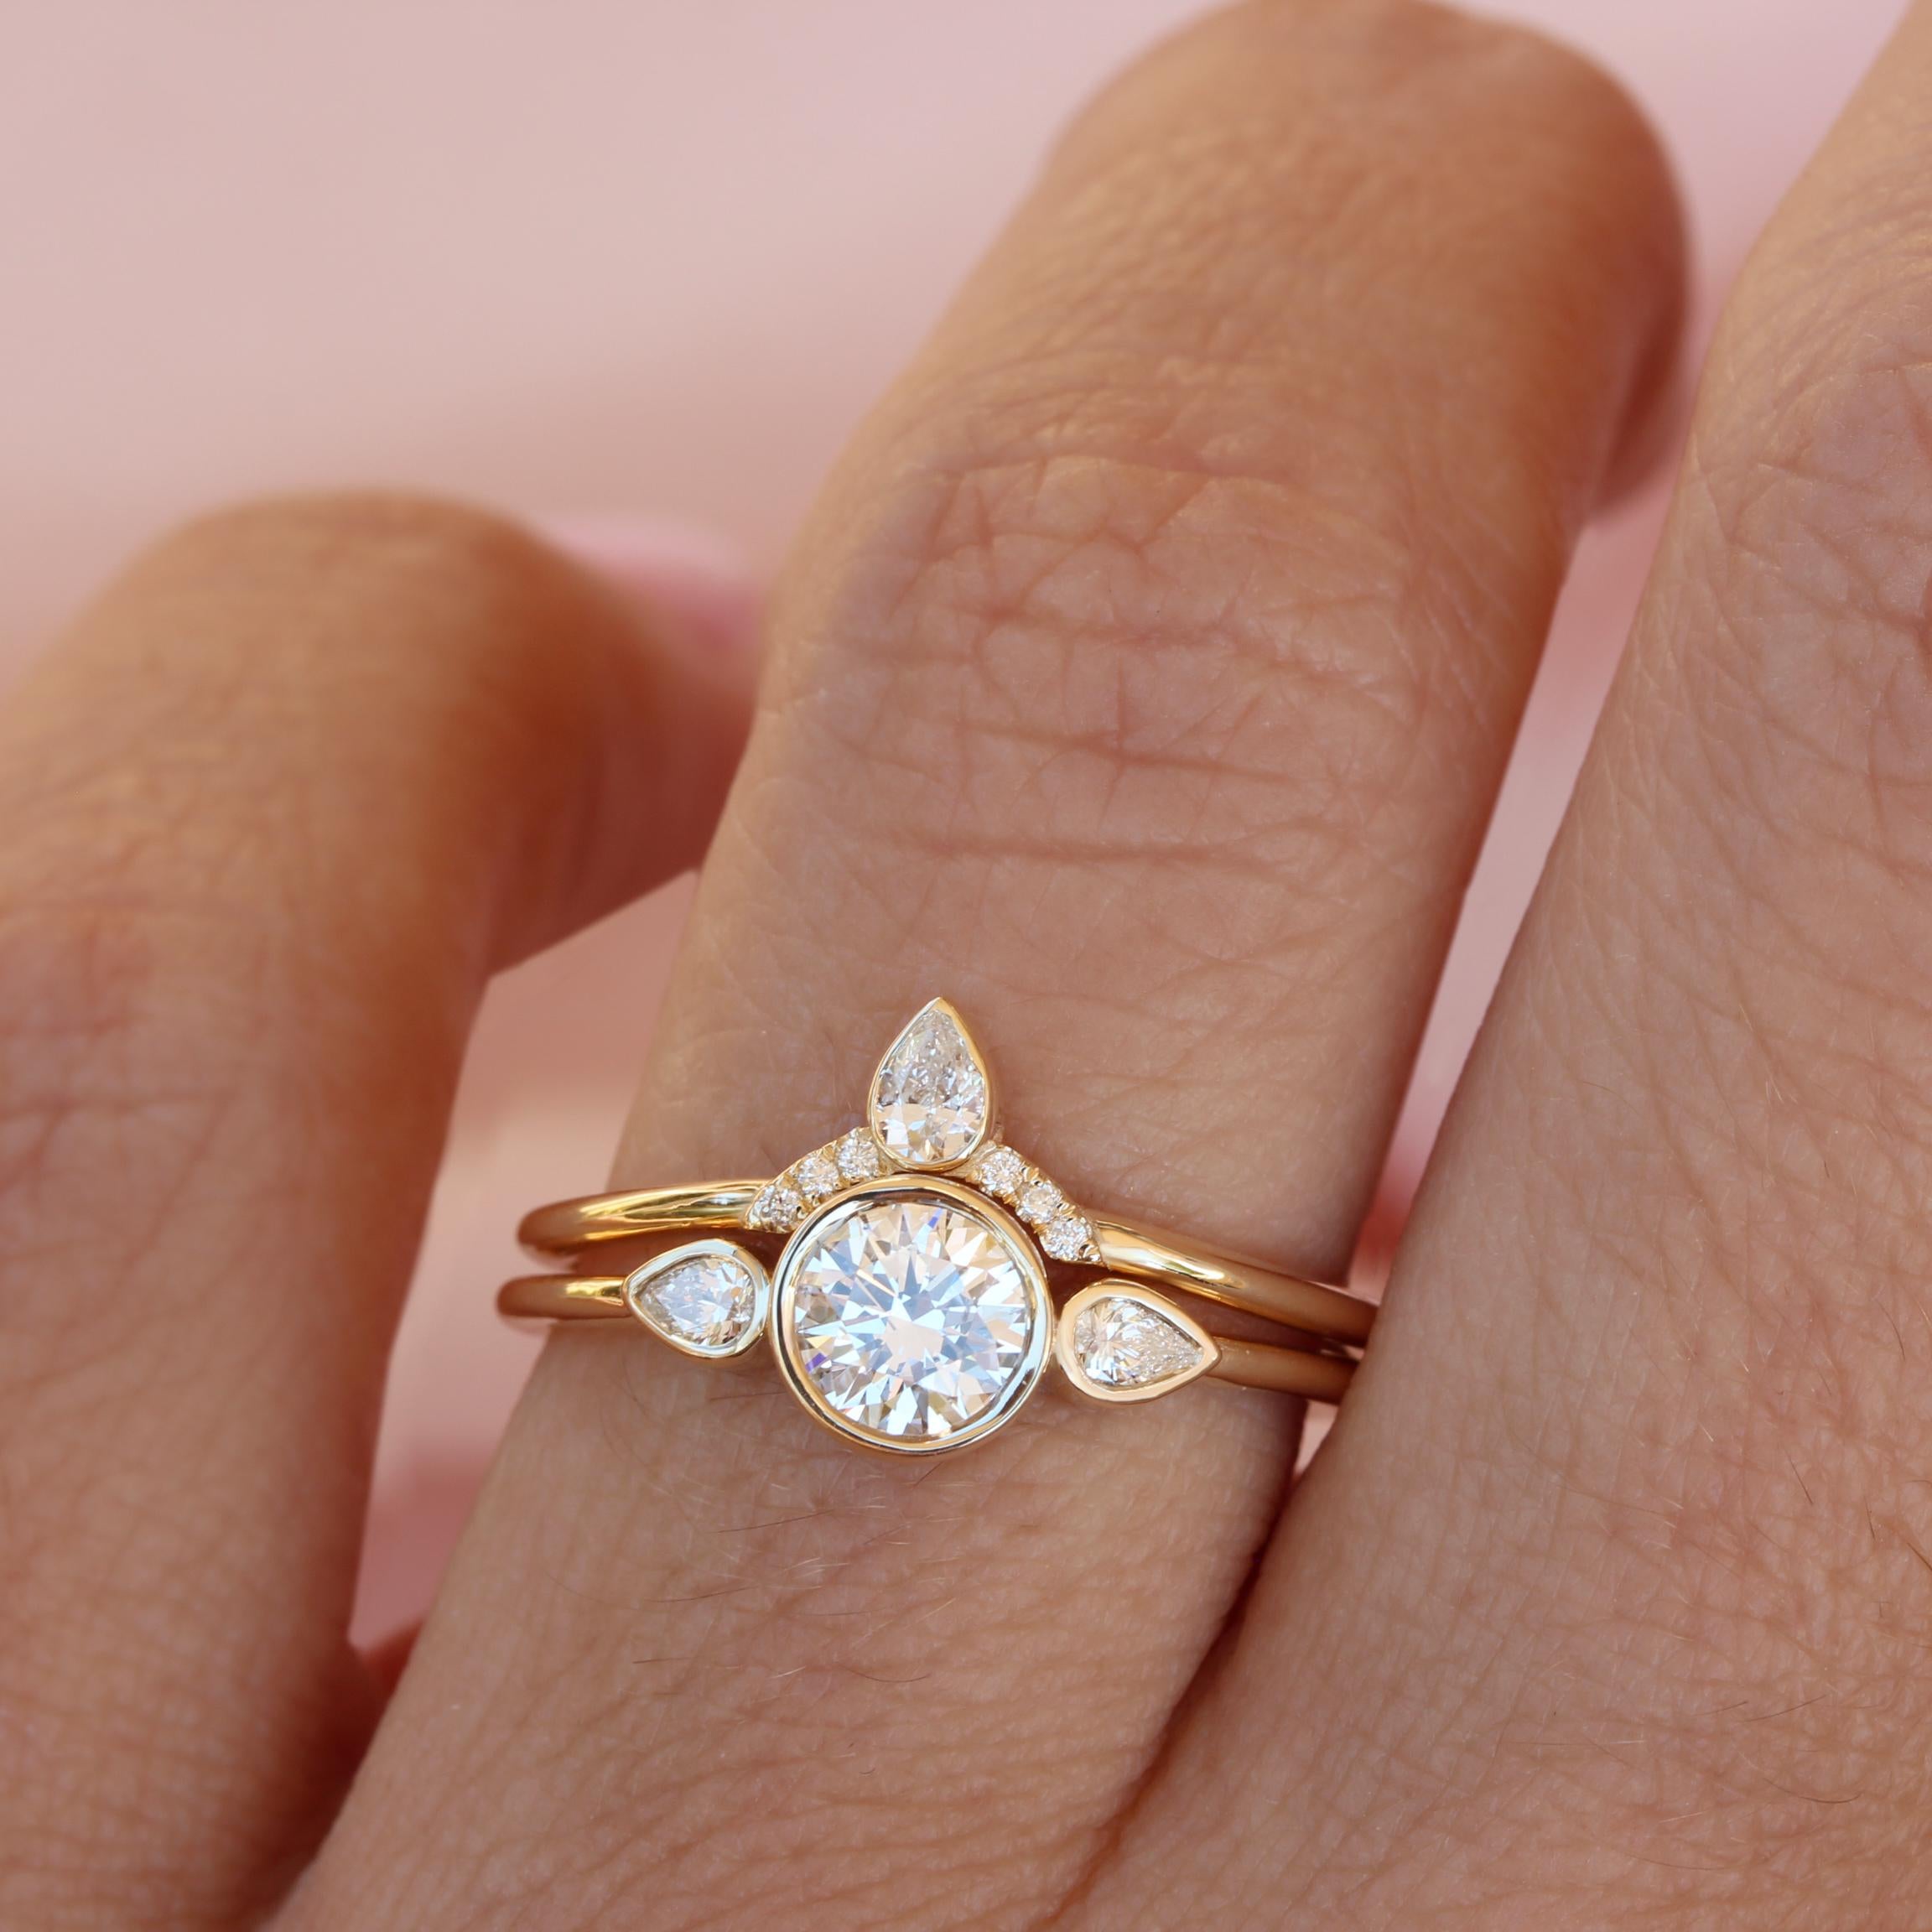 Minimalist Three Stone Engagement Moissanite Bezel Two Ring Set.
An original design by Silly Shiny Diamonds.
This list is for the two ring set.
Hand made with care. 
An original design by Silly Shiny Diamonds. 

Details:
* Center stone shape: Round